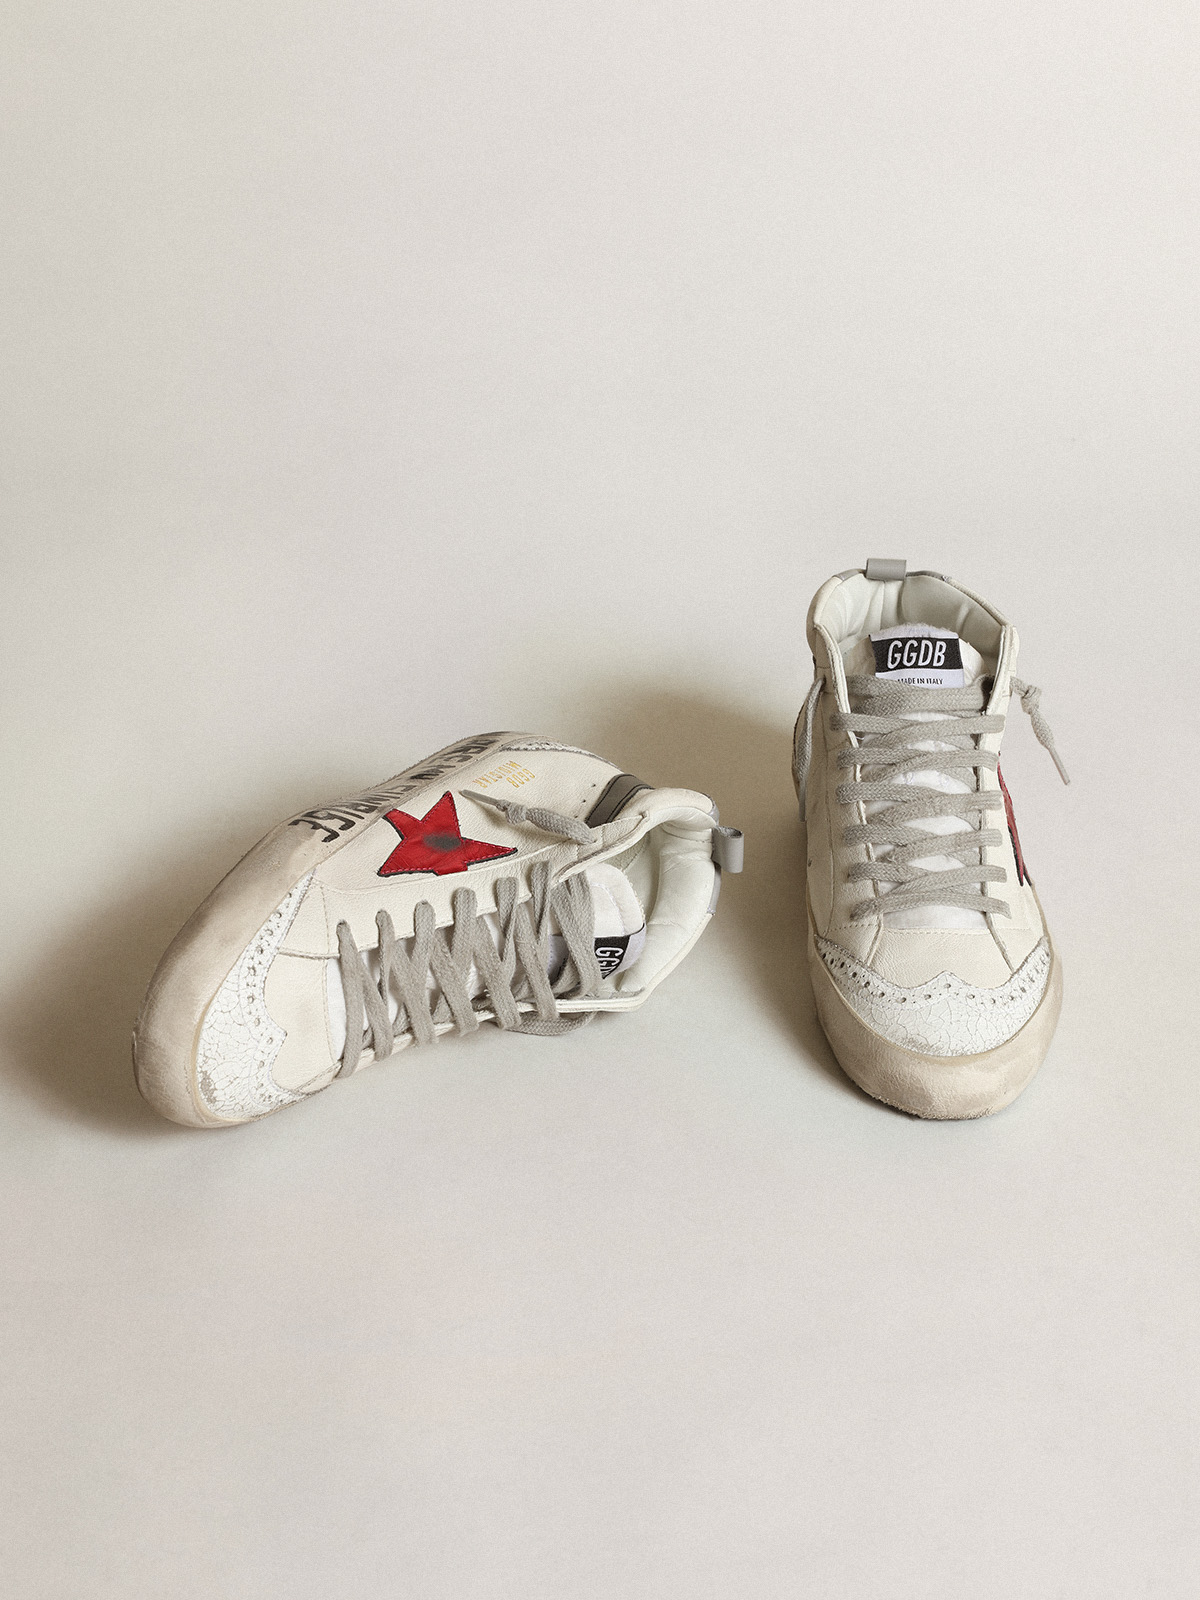 Mid Star with a pink laminated leather star and black flash | Golden Goose